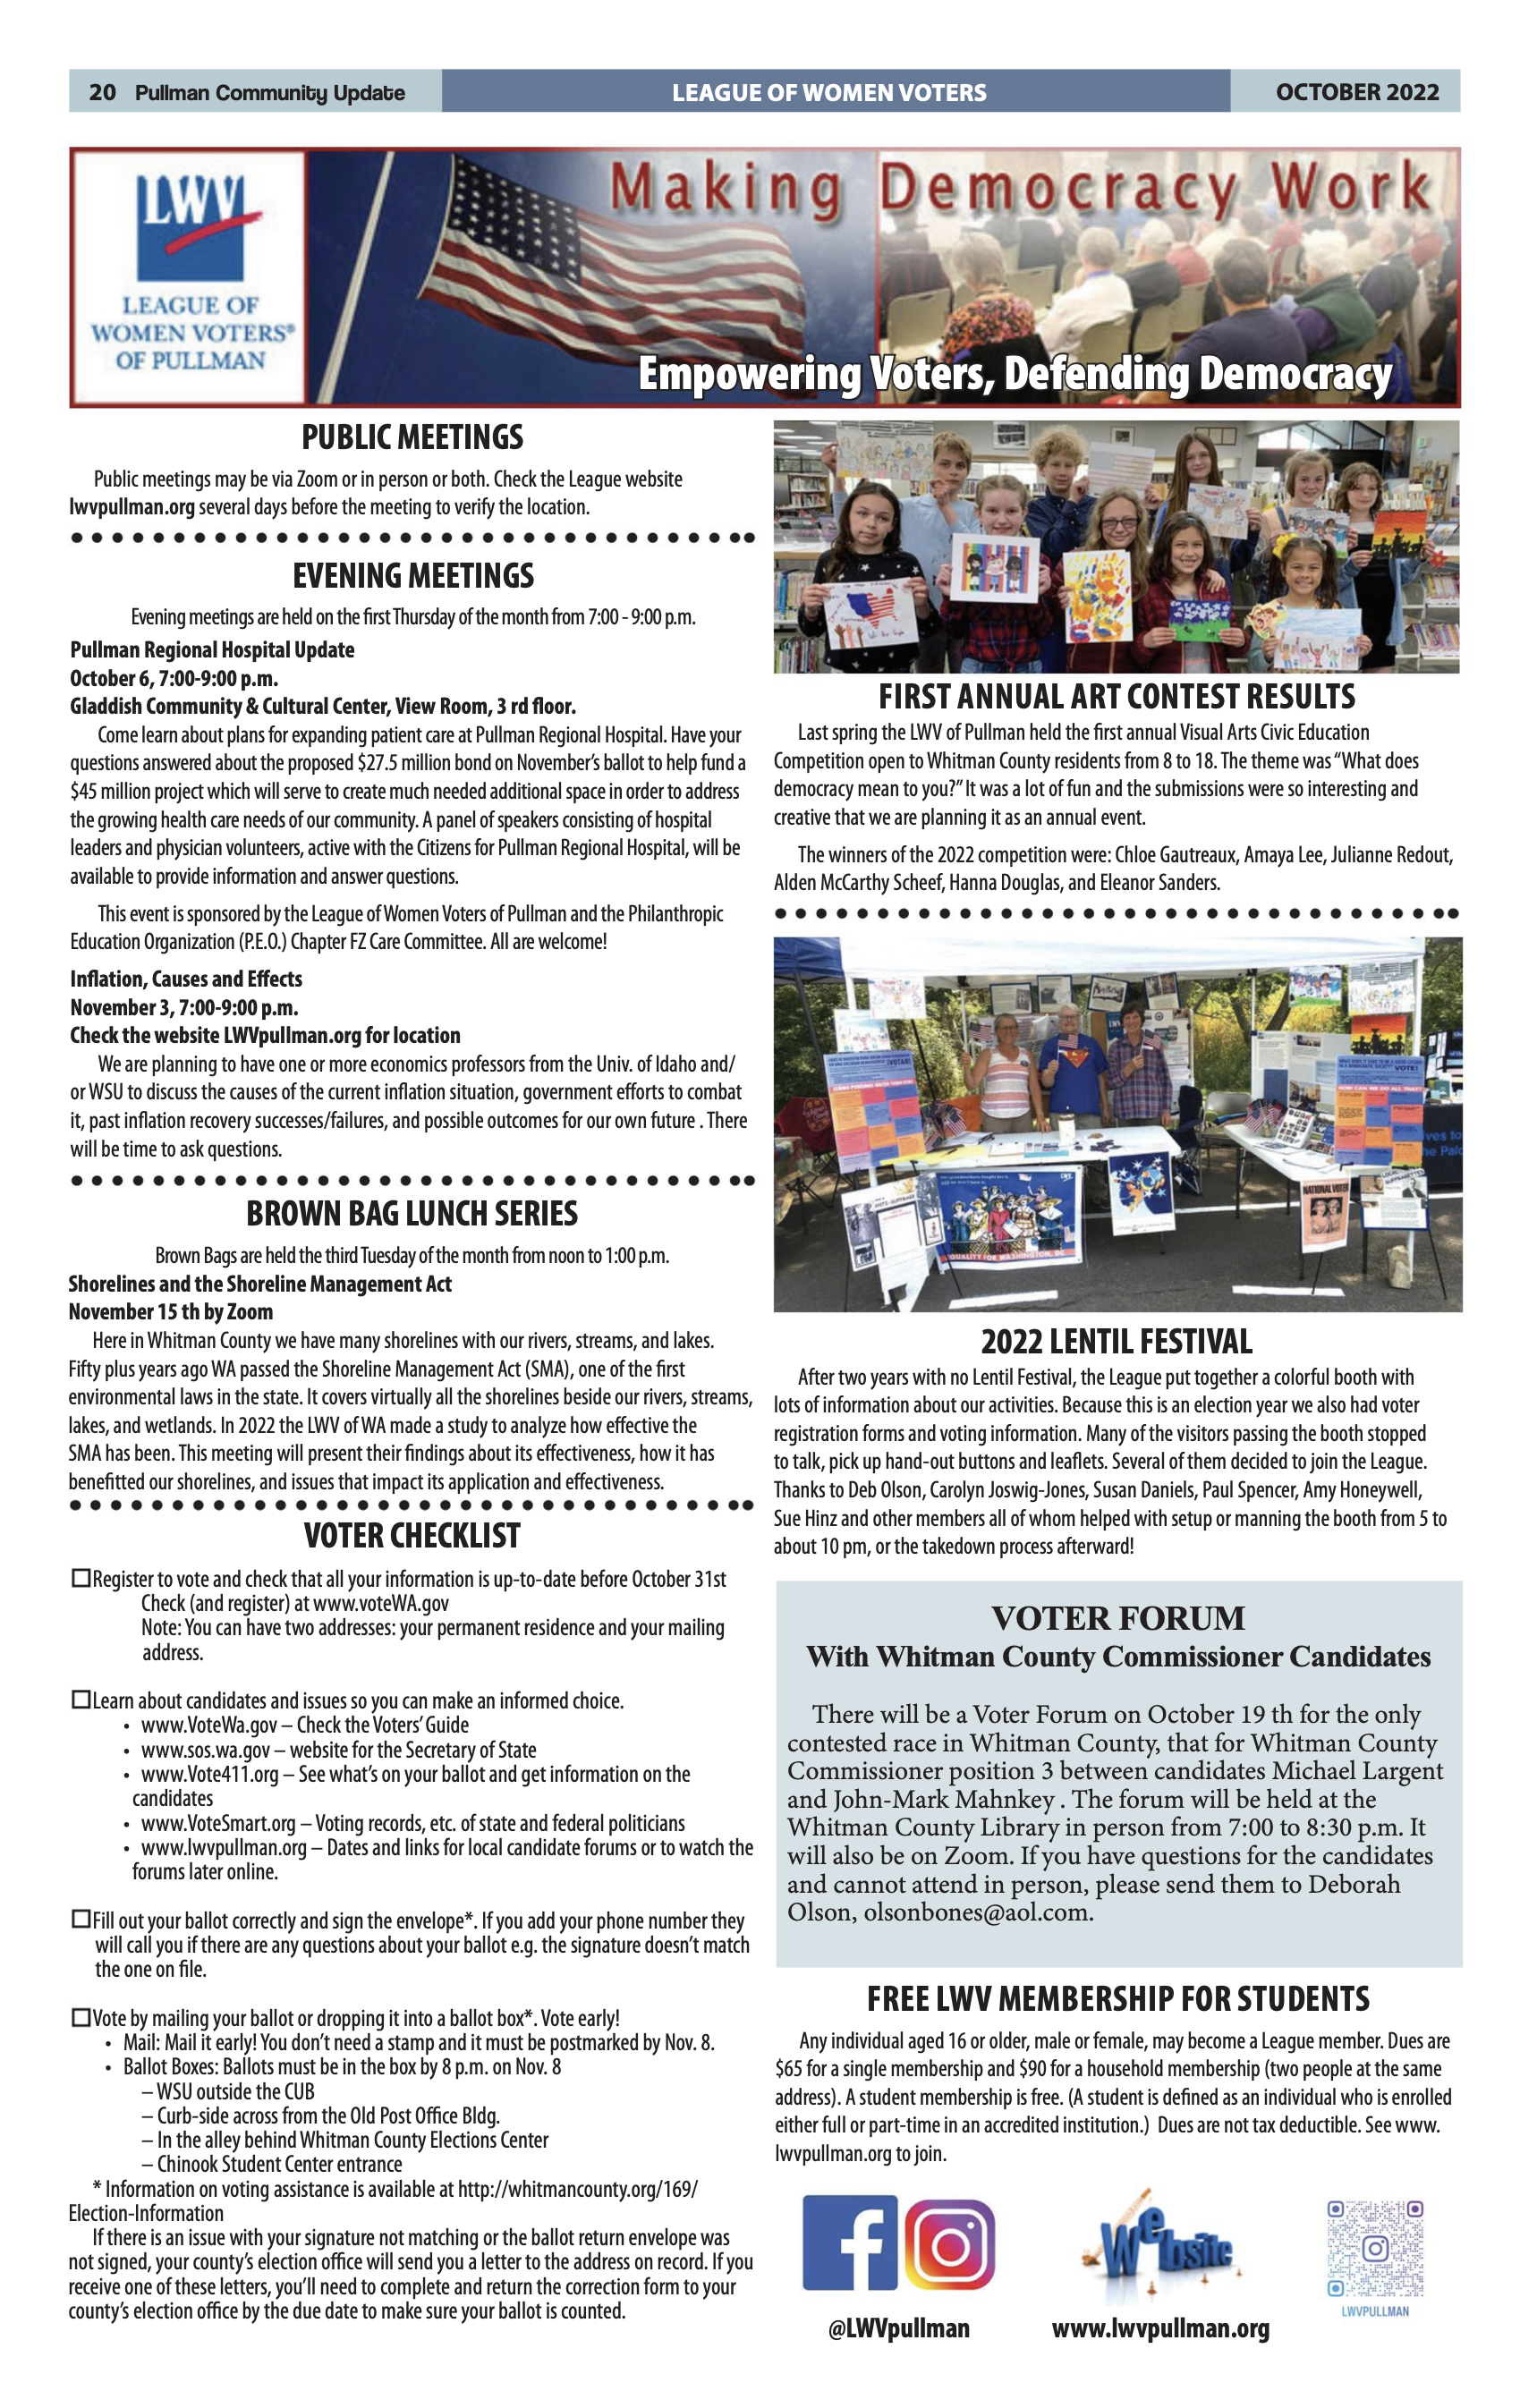 picture of the LWVP editorial page in the October issue of the Pullman Community Update